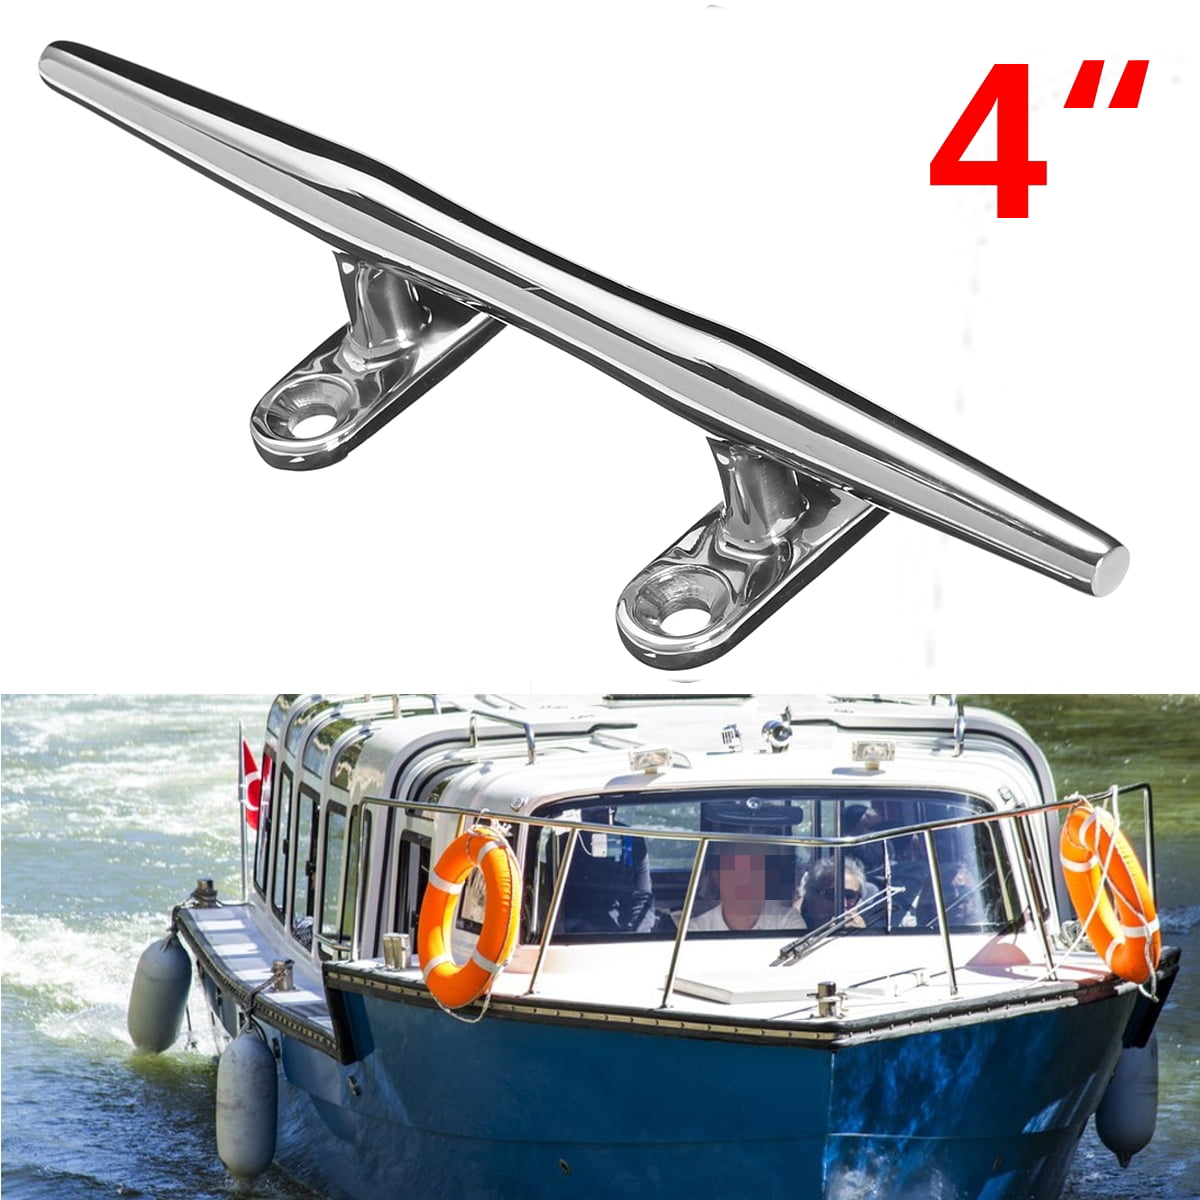 Stainless Steel w/Fasteners for Mooring Marine Boat Yacht KSTE Boat Cleat Dock Folding Cleat Stainless Steel Boat Mooring Dock Cleat 